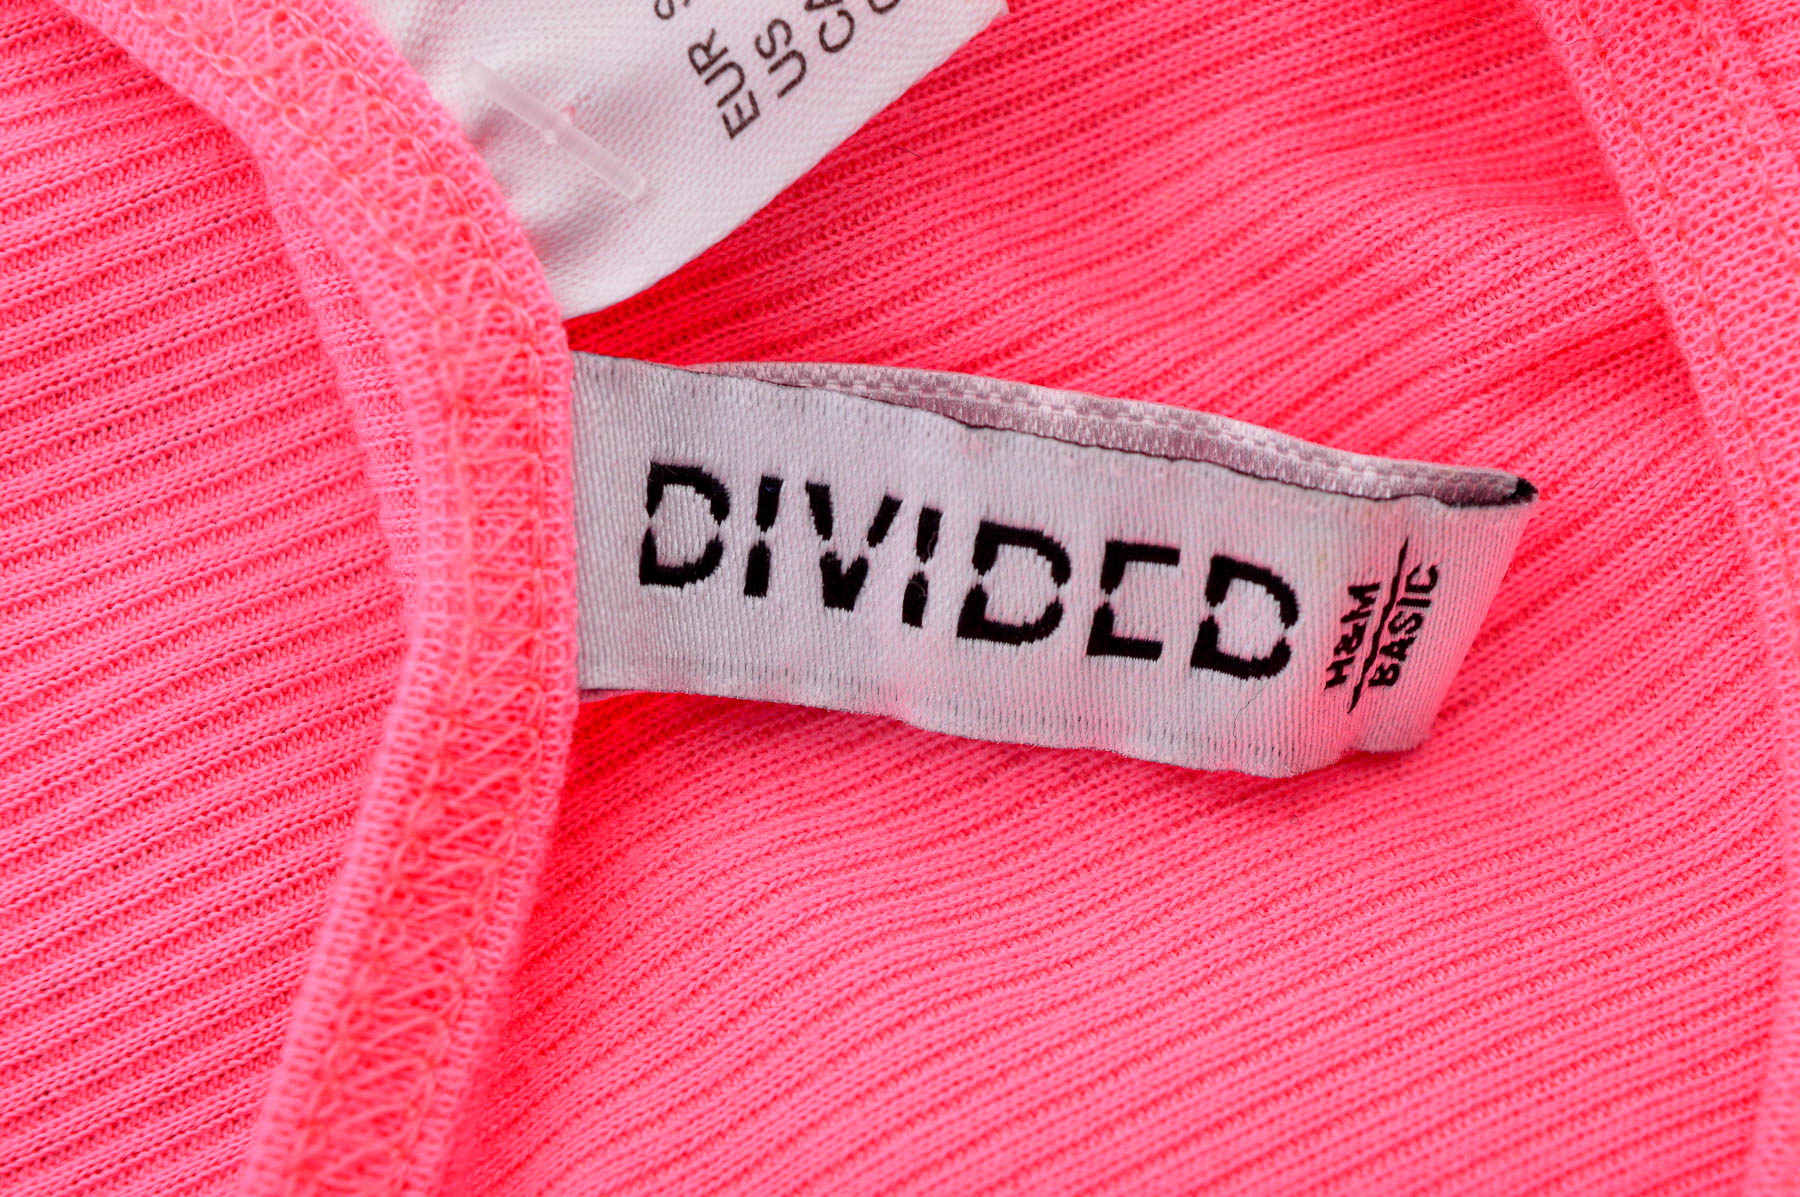 Women's top - DIVIDED - 2